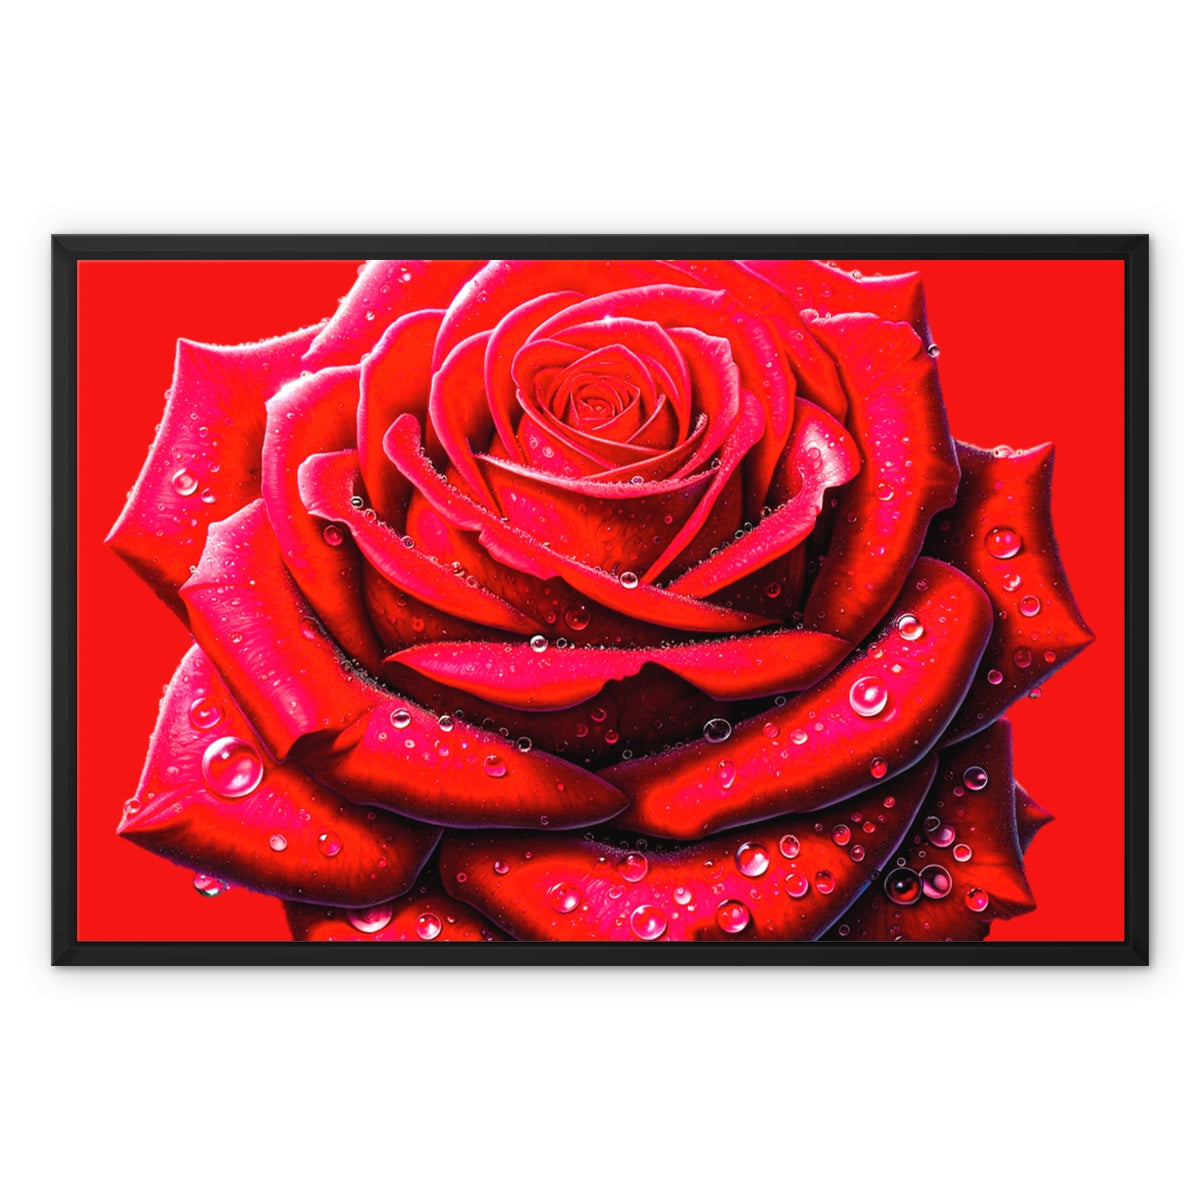 Red Rose Waterdrops Framed Canvas